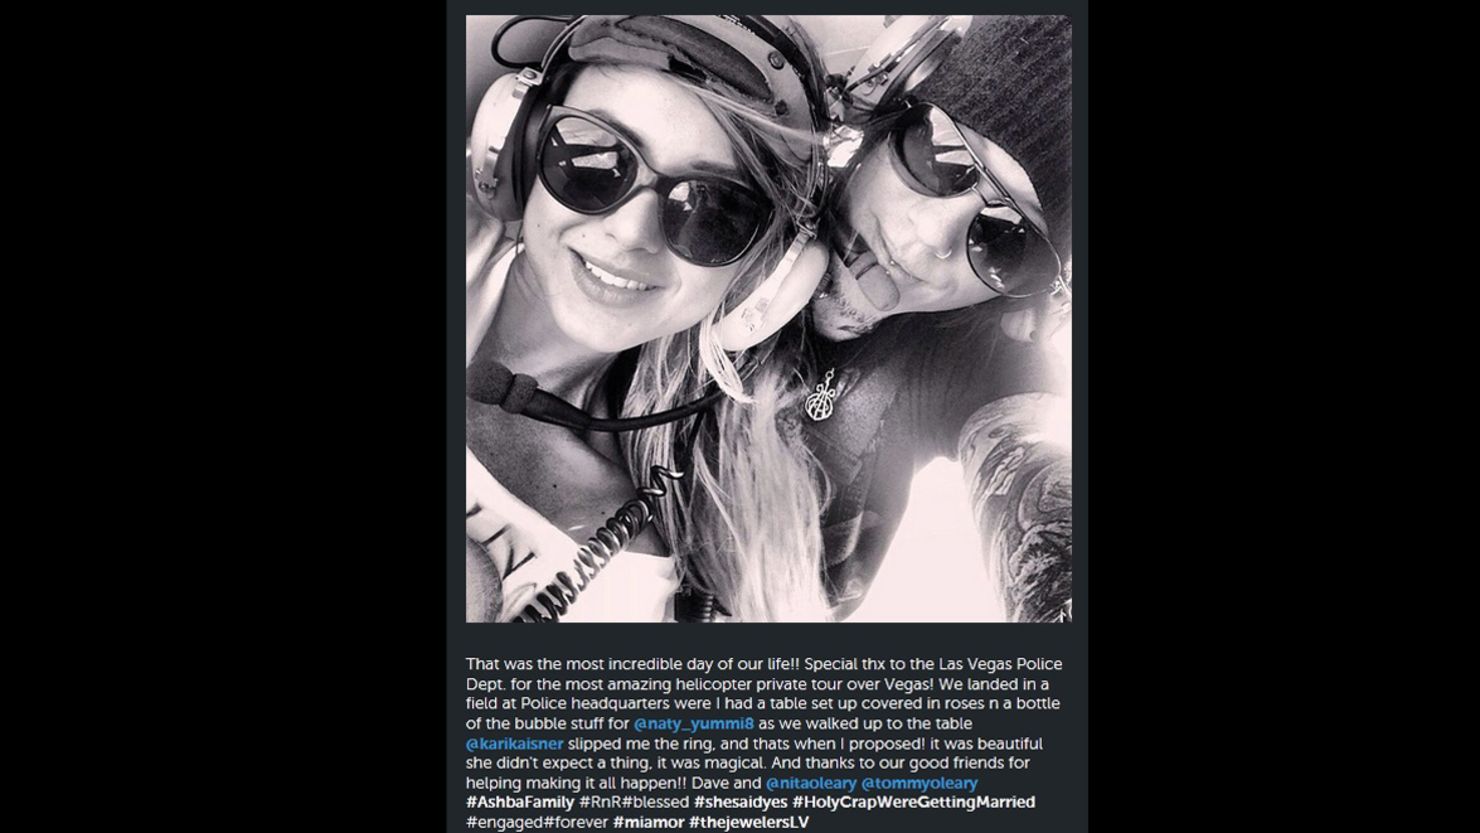 The Instagram photo Daren Jay "DJ" Ashba posted showing him and his now-fiancée in a police helicopter. 